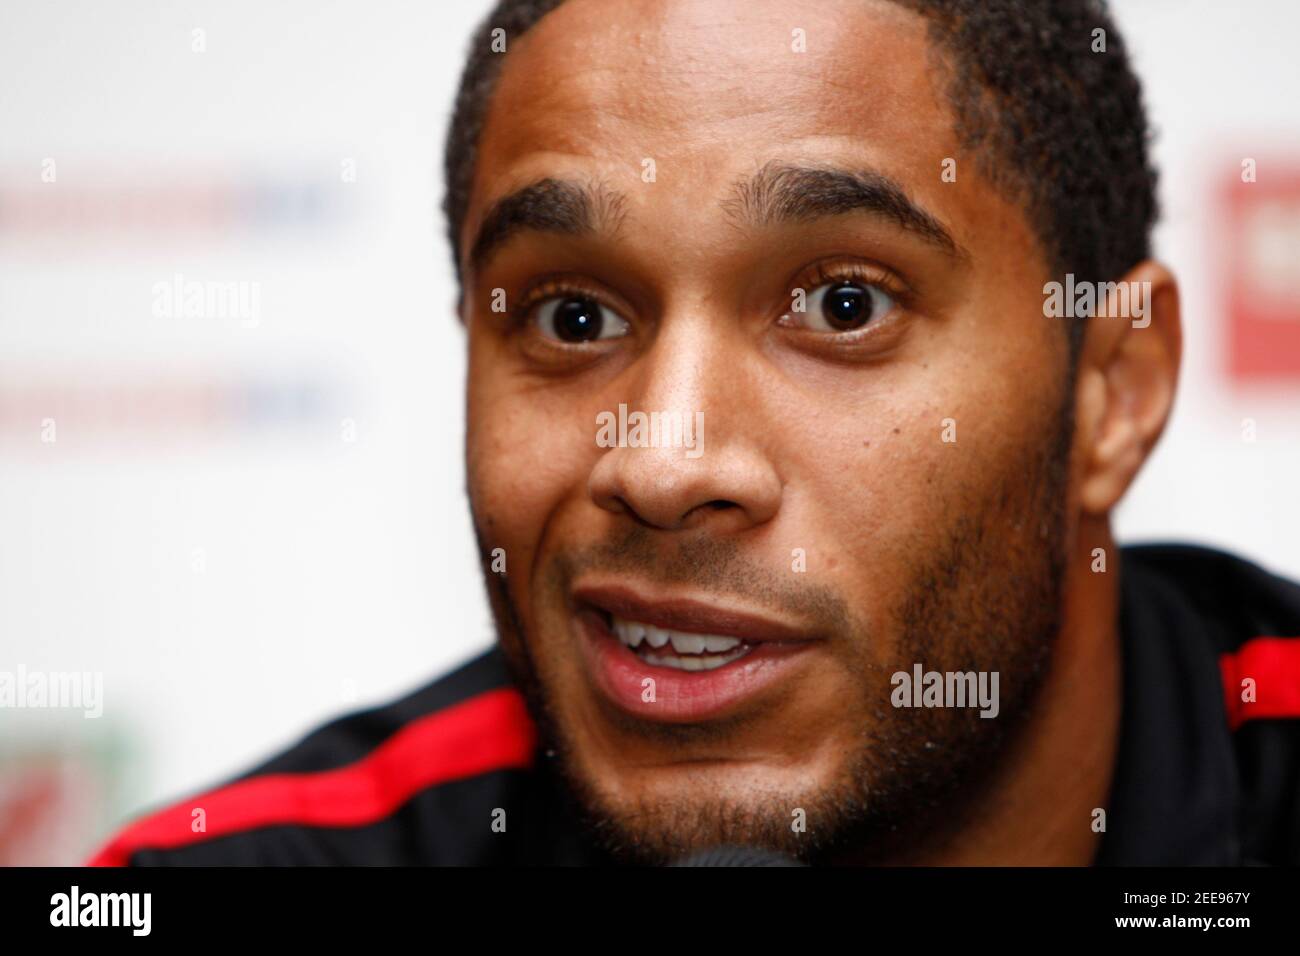 Football - Wales Press Conference - Vale Hotel - Vale of Glamorgan Resort - Hensol - Wales - 7/10/10  Ashley Williams    Mandatory Credit: Action Images / Peter Cziborra Stock Photo